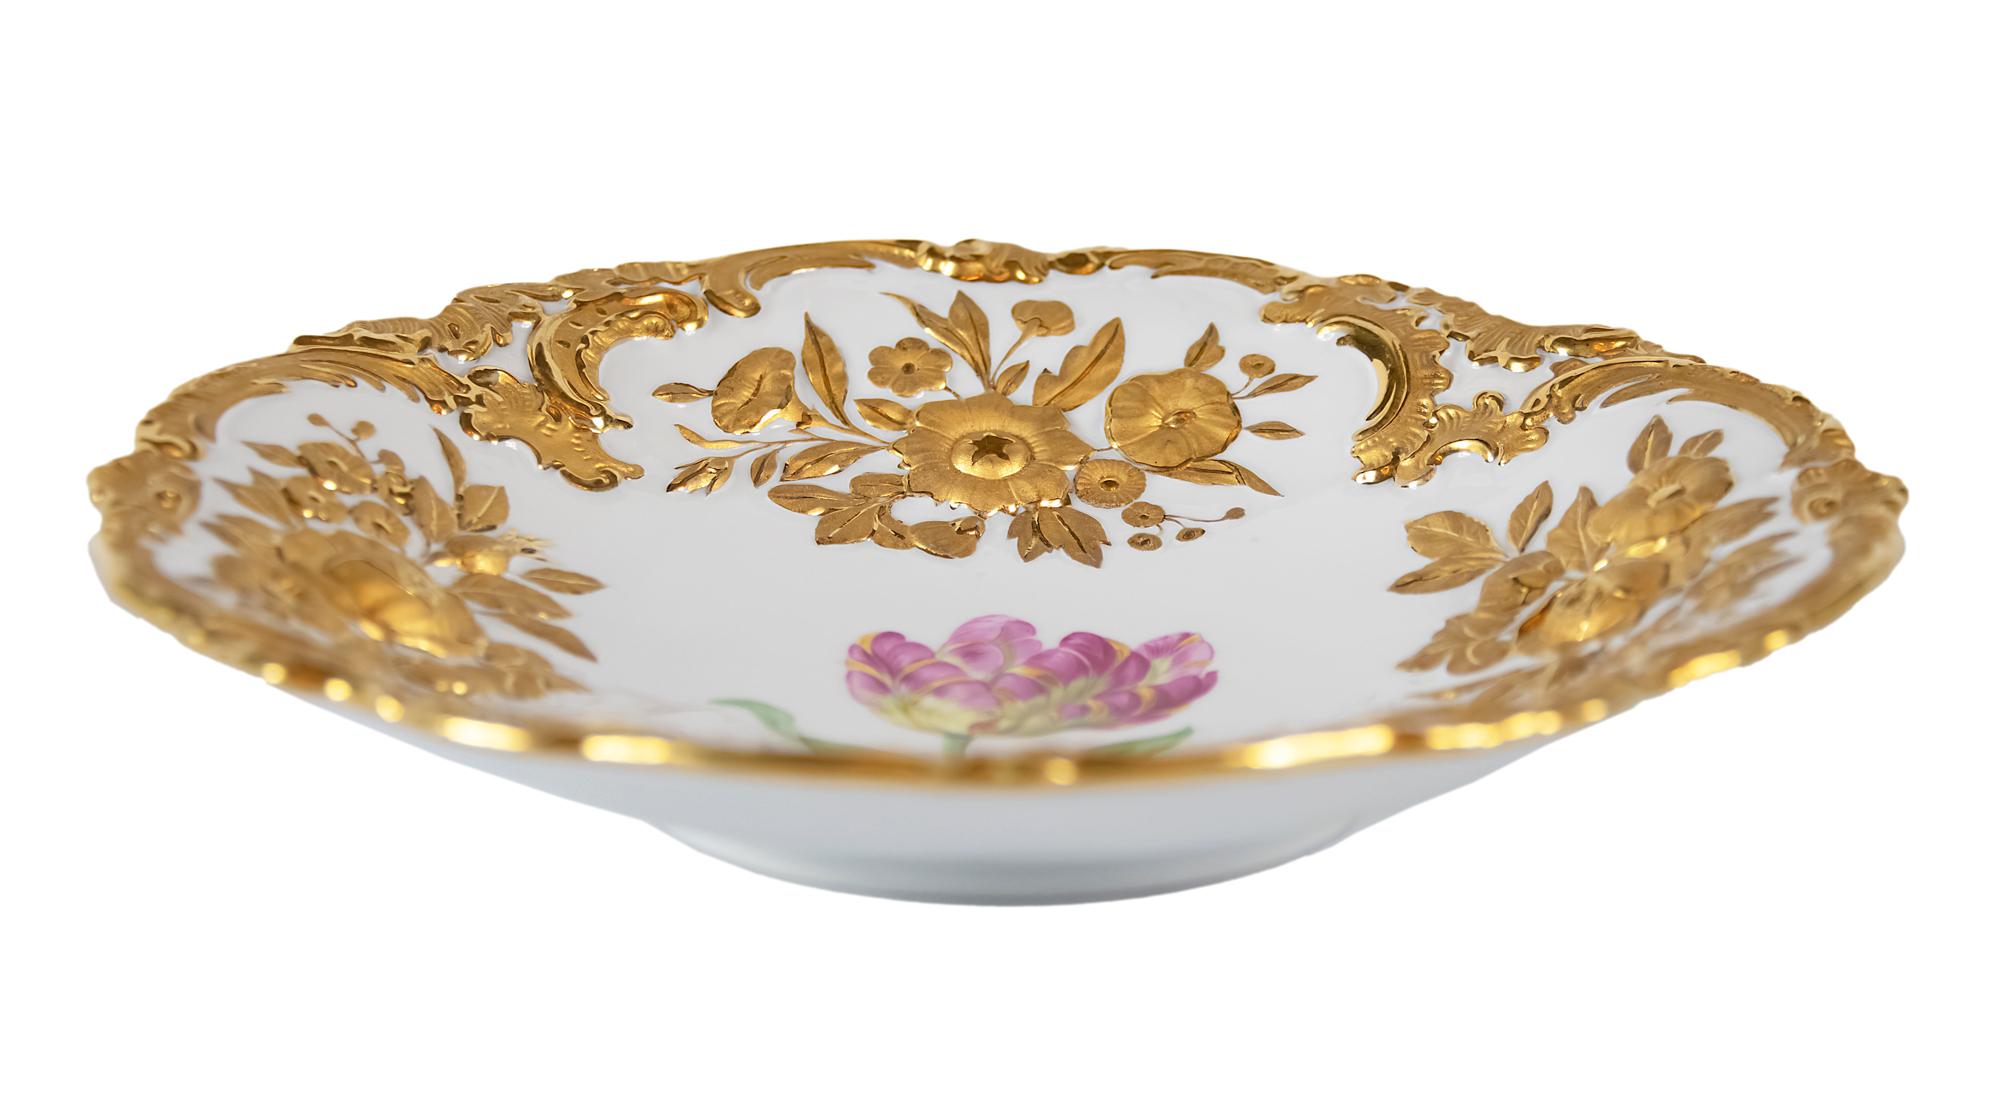 Meissen porcelain deep plate with hand painted relief floral motives and rich gold decor.
 